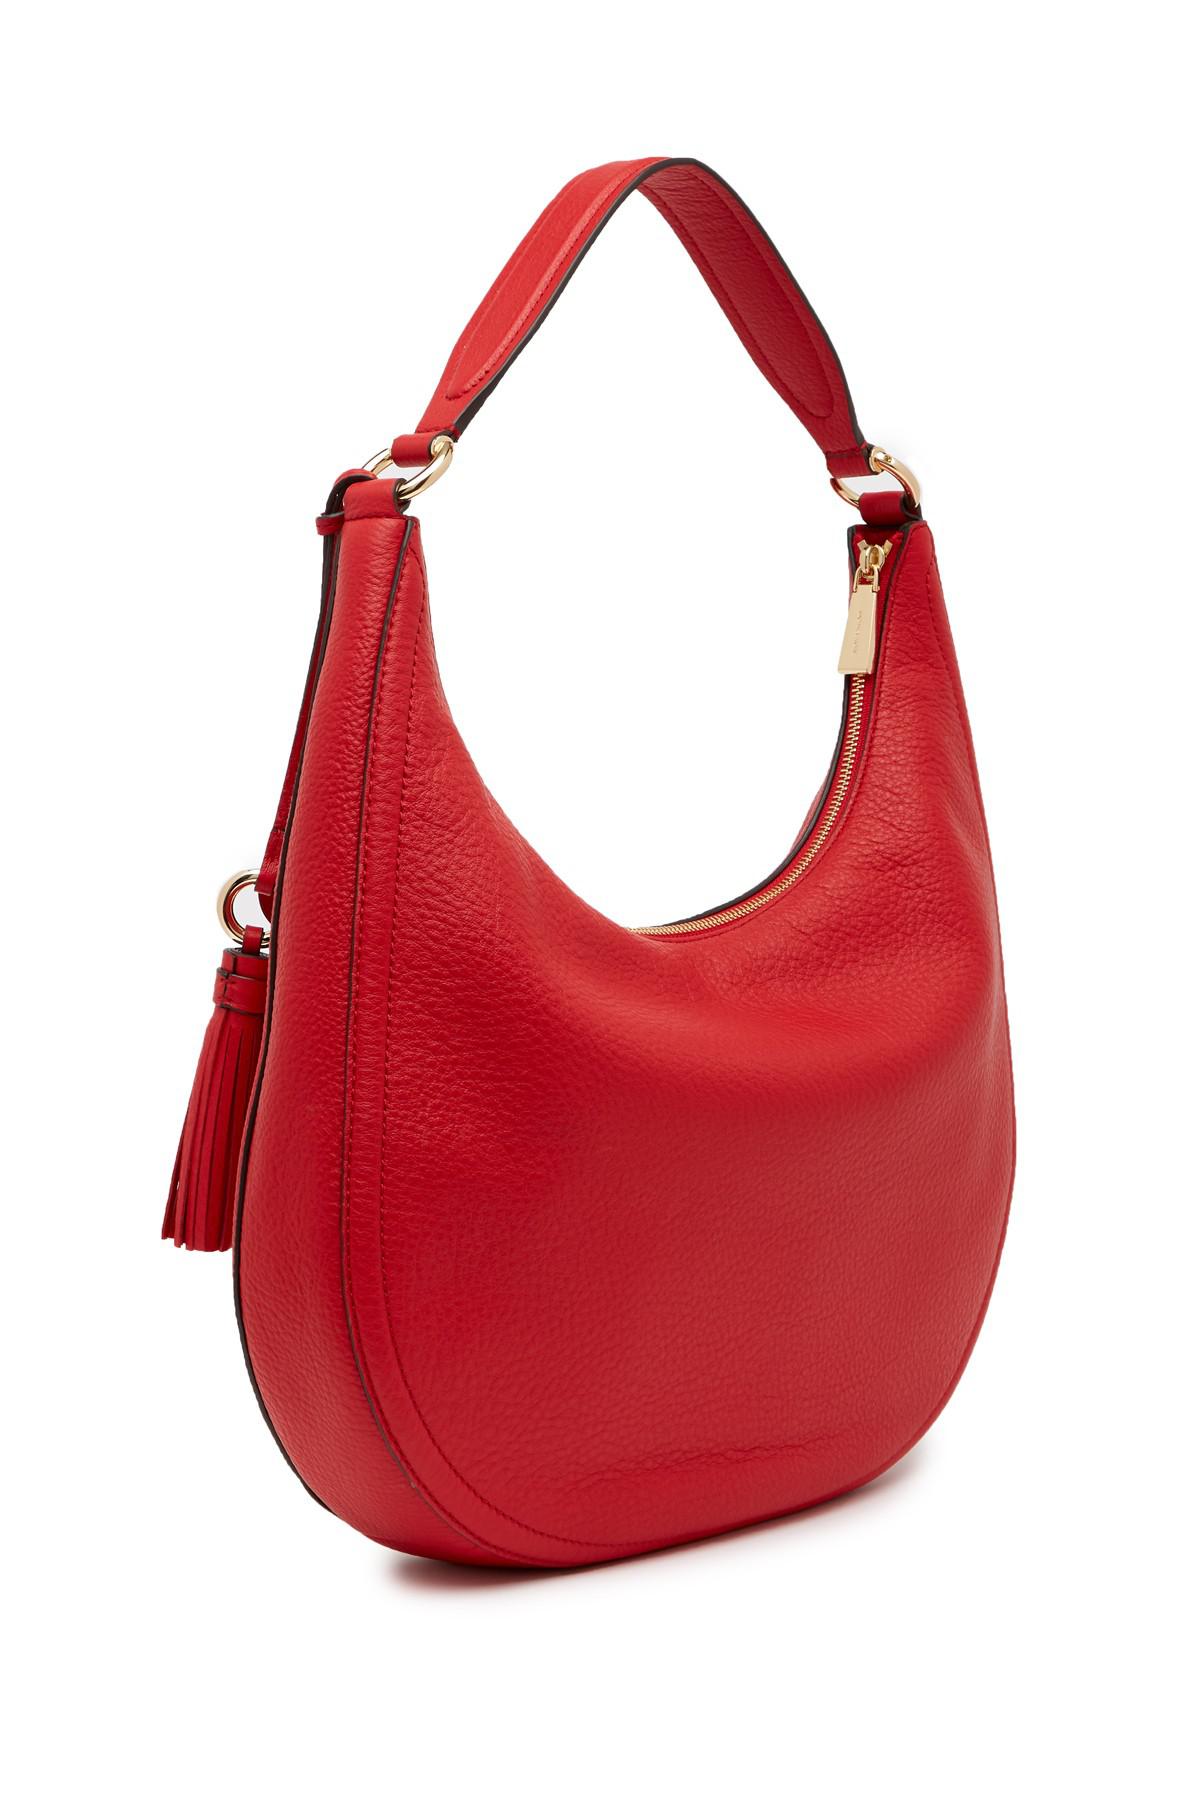 Michael Kors Large Leather Hobo Bag in Bright Red Red  Lyst